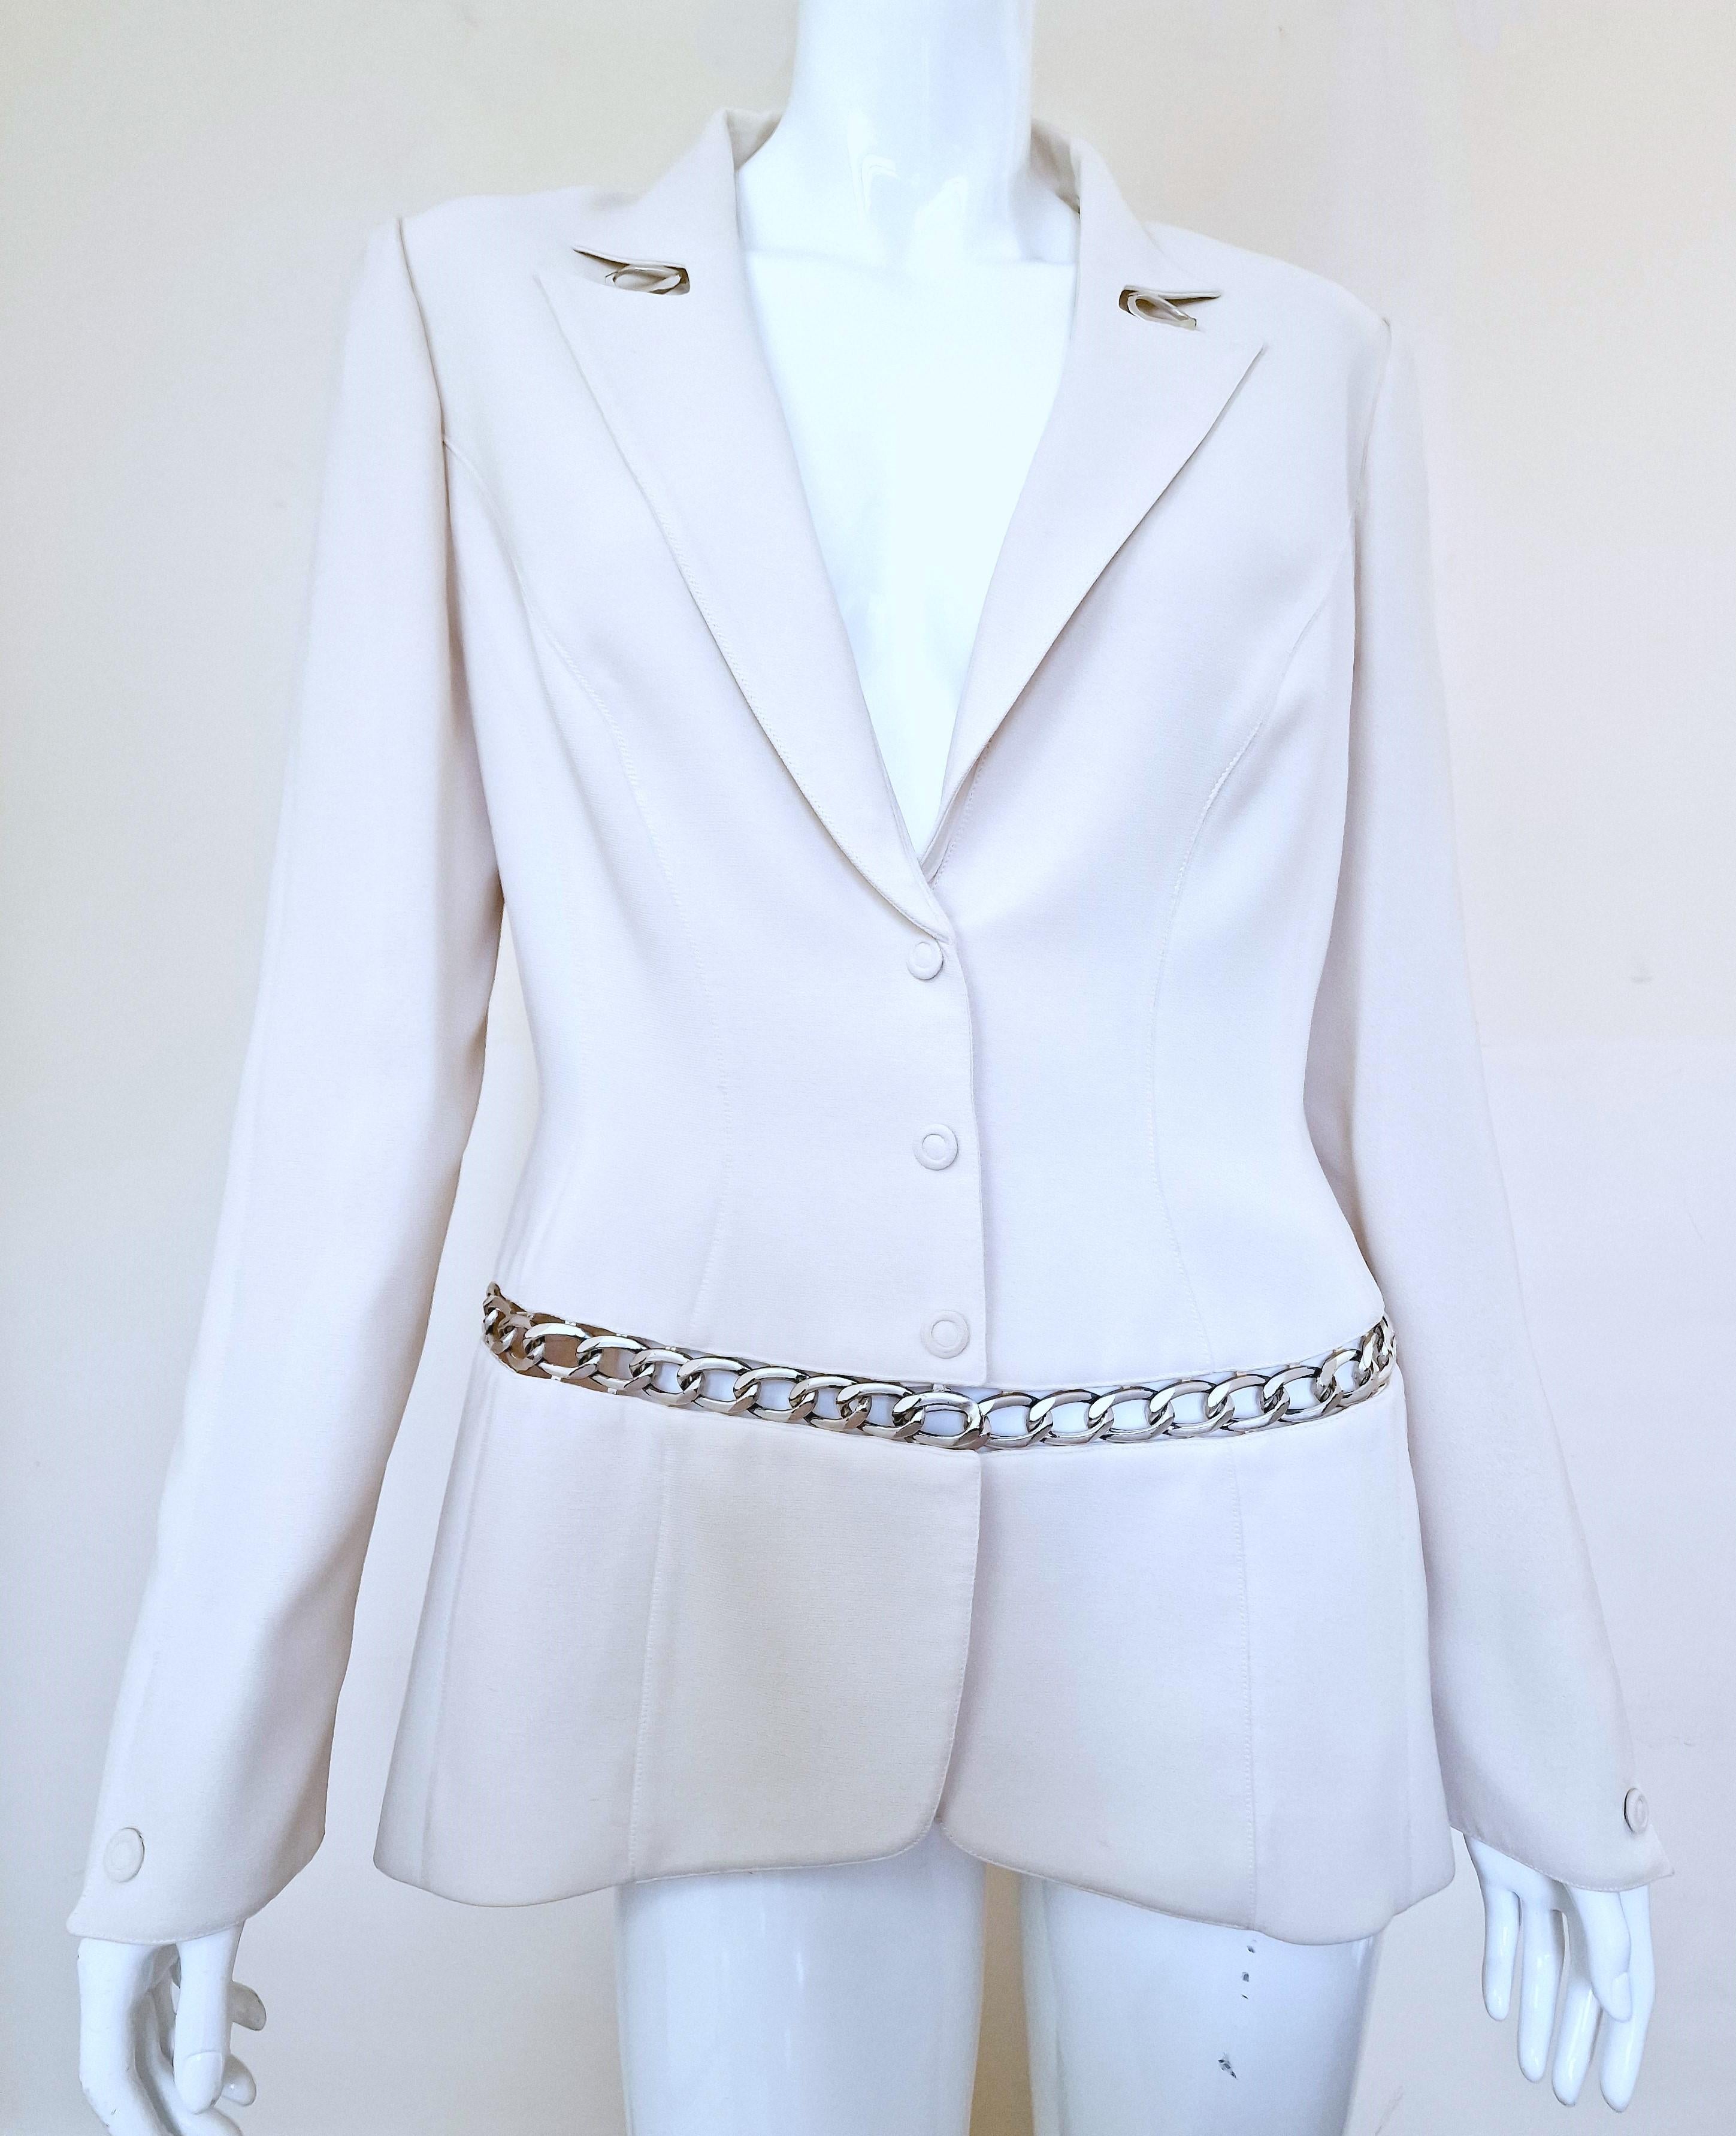 Thierry Mugler Chain Runway Evening Couture White Wasp Waist Large Blazer Jacket For Sale 7